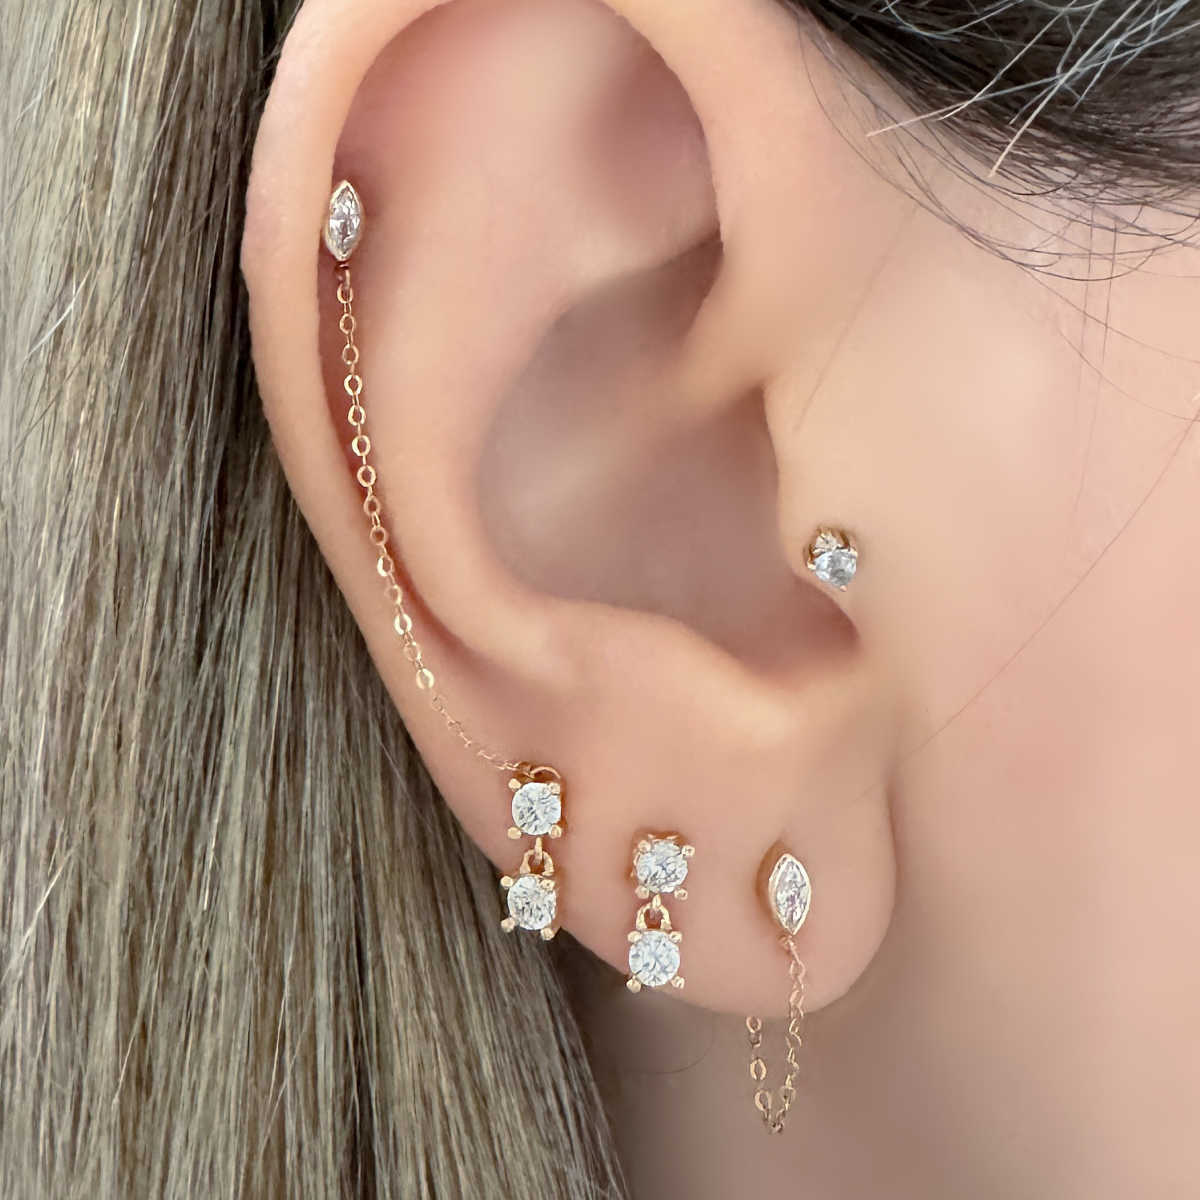 Marquise Shaped Connector Stud | 14k Gold Helix Chain Earring on Model